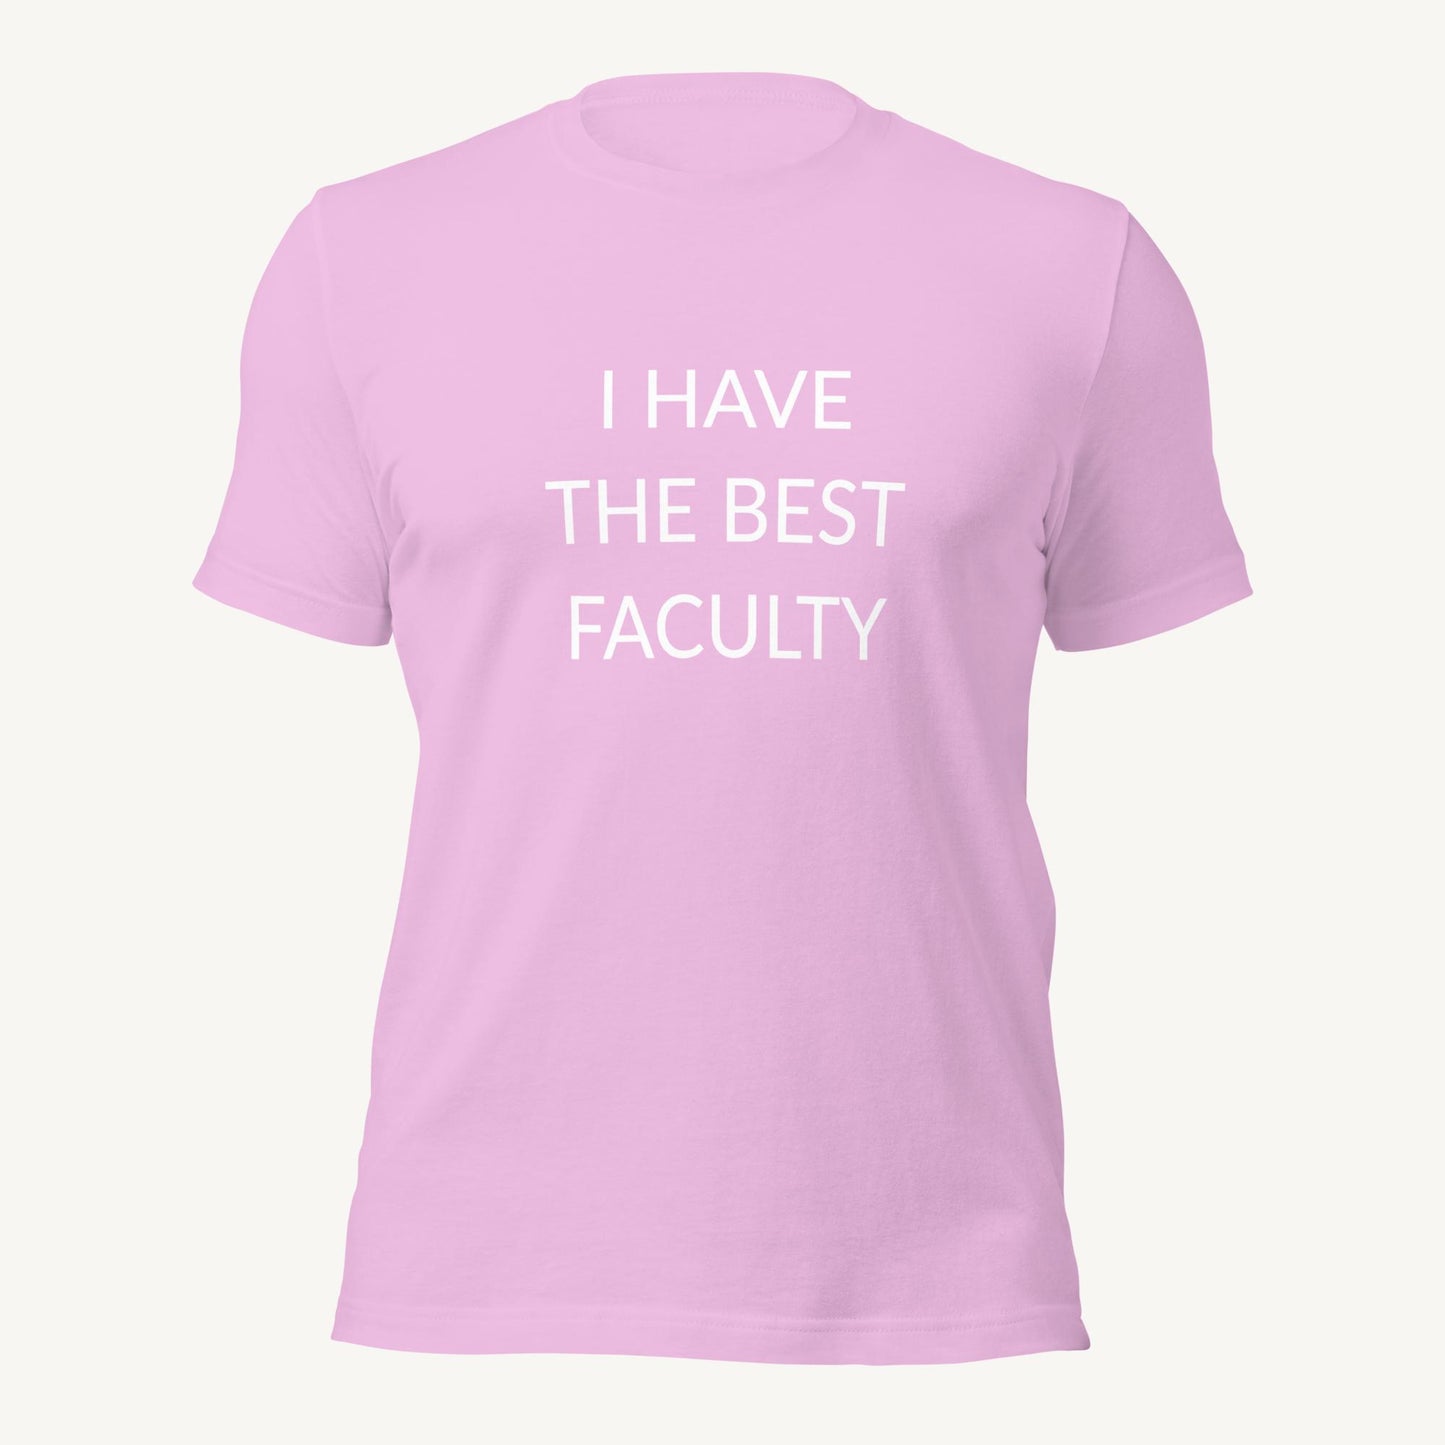 "I have the best faculty" | Unisex T-Shirt